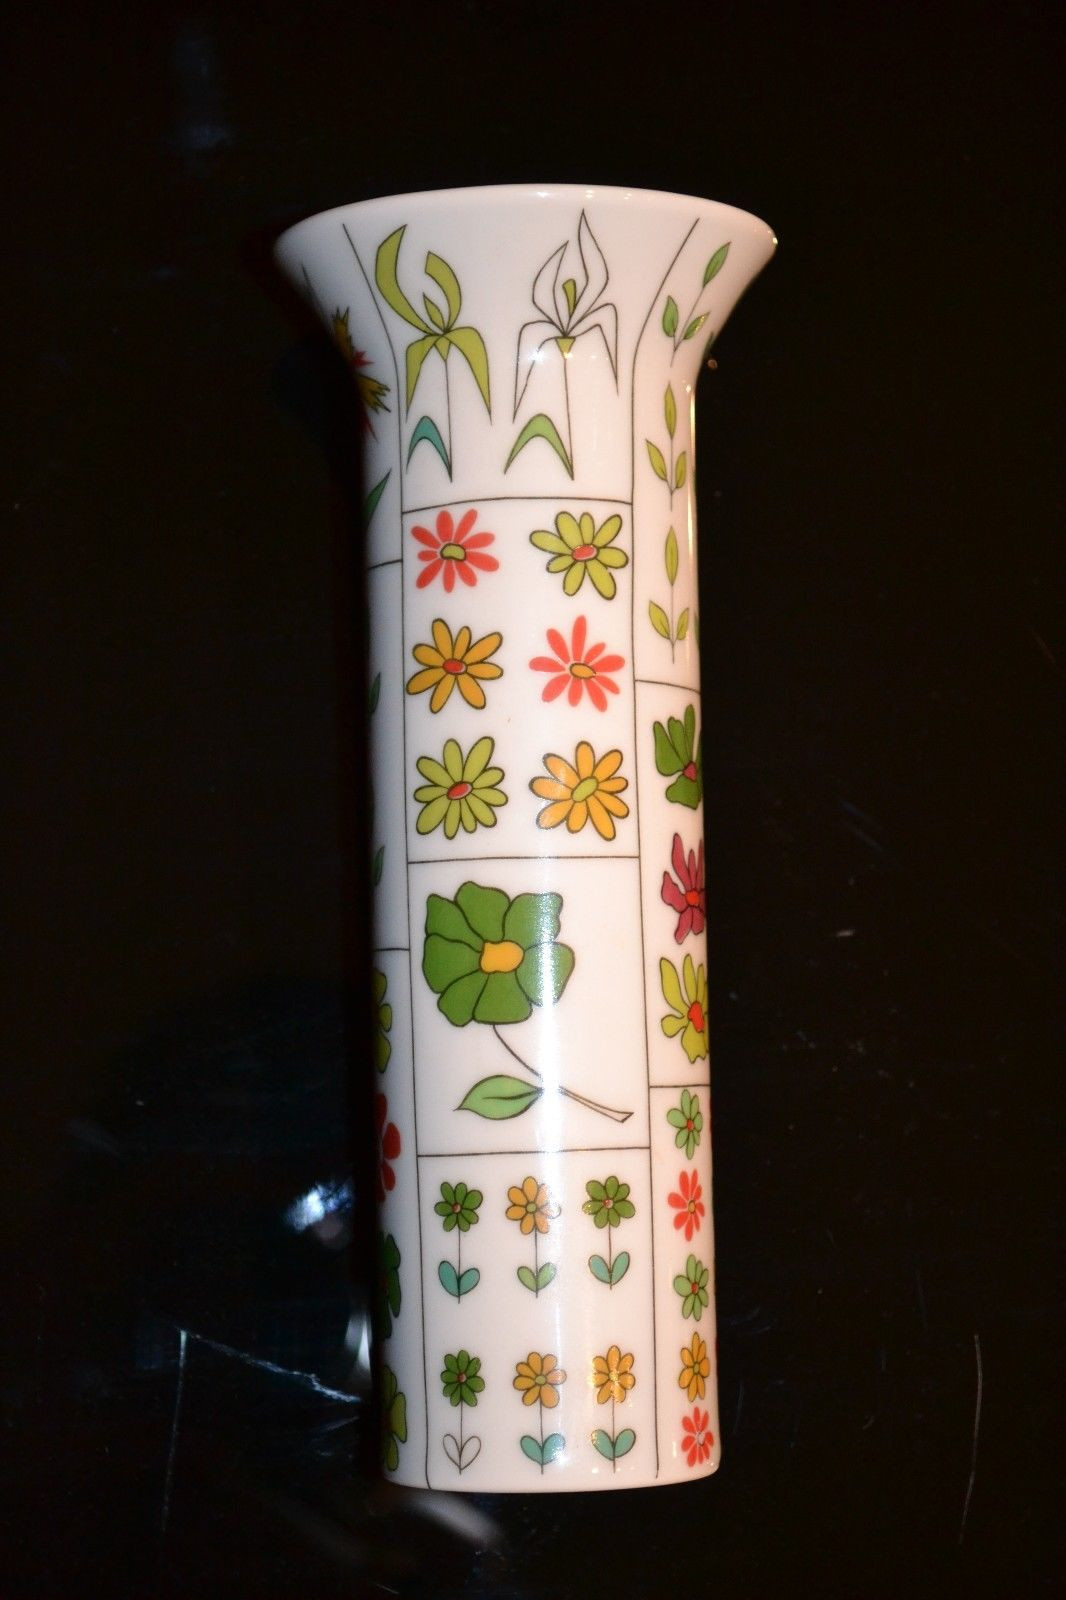 11 attractive Rosenthal Vase Ebay 2024 free download rosenthal vase ebay of vase rosenthal studio line piedmont emilio pucci hans theo pertaining to vase rosenthal studio line piedmont emilio pucci hans theo baumann 1 of 2only 1 available vase